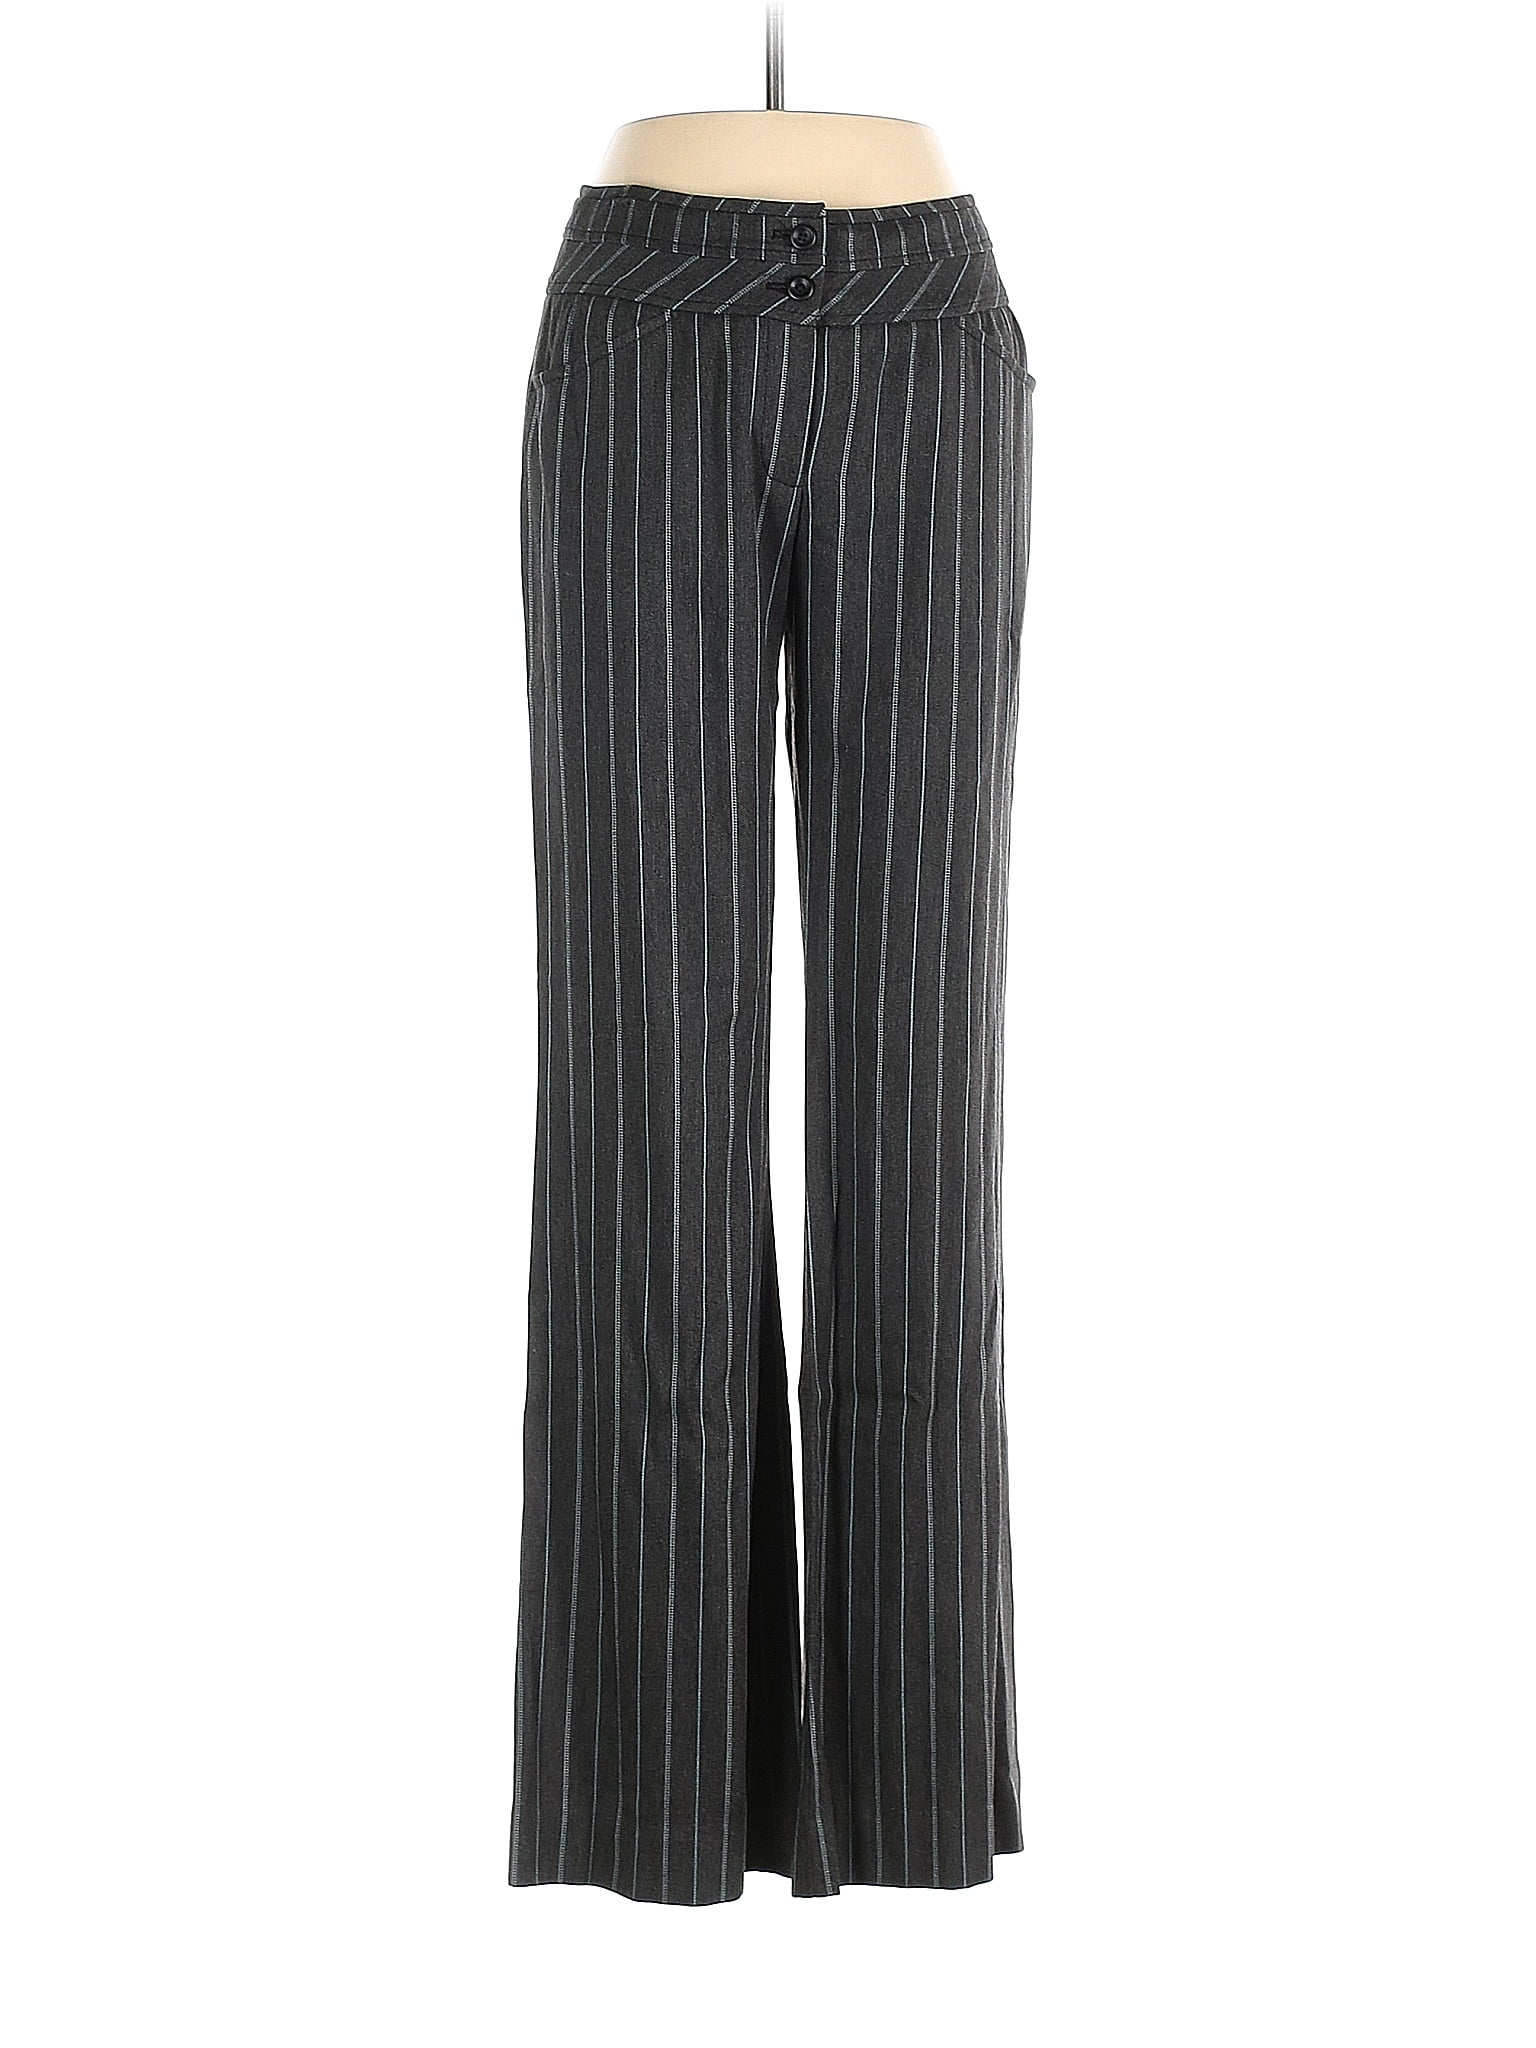 E3 by Etcetera Stripes Black Gray Casual Pants Size 0 - 92% off | thredUP